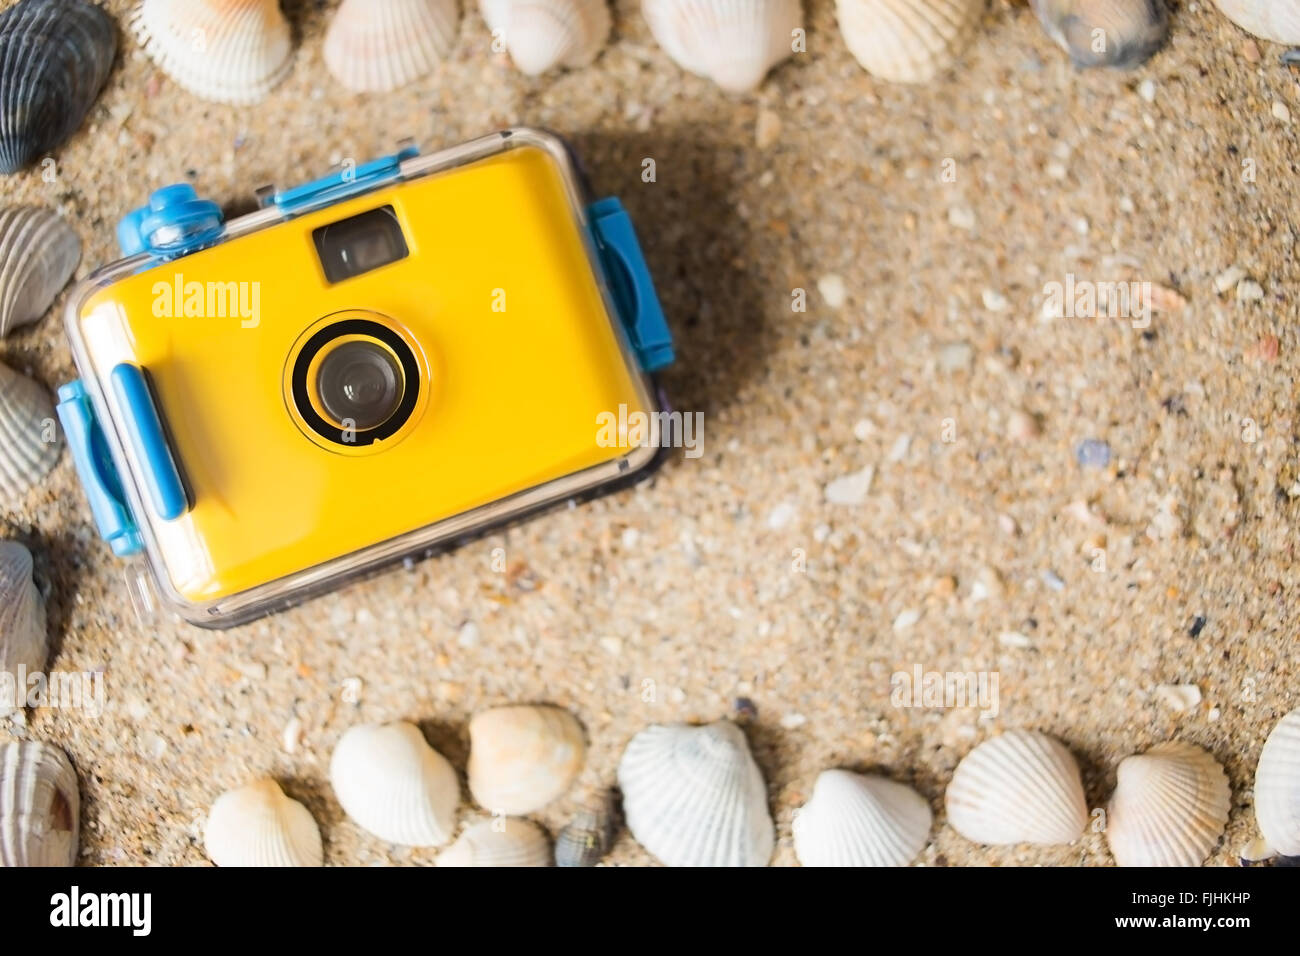 Yellow camera lying on sand at the beach Stock Photo